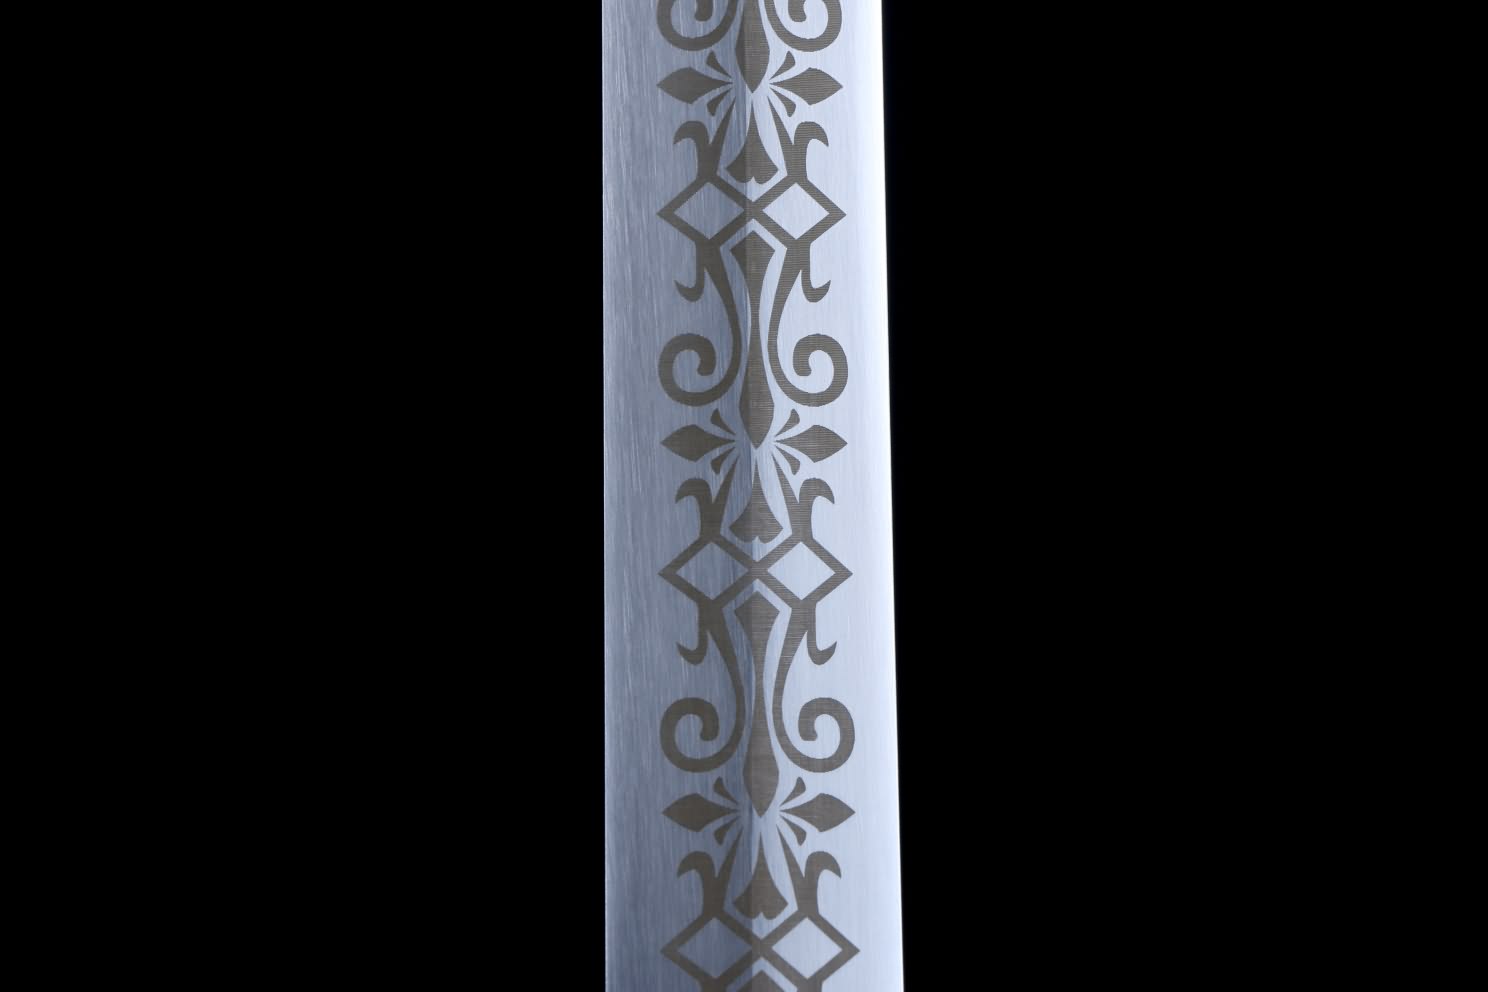 Han jian Sword,Battle Ready Hand Forged High Carbon Steel Etched Blade